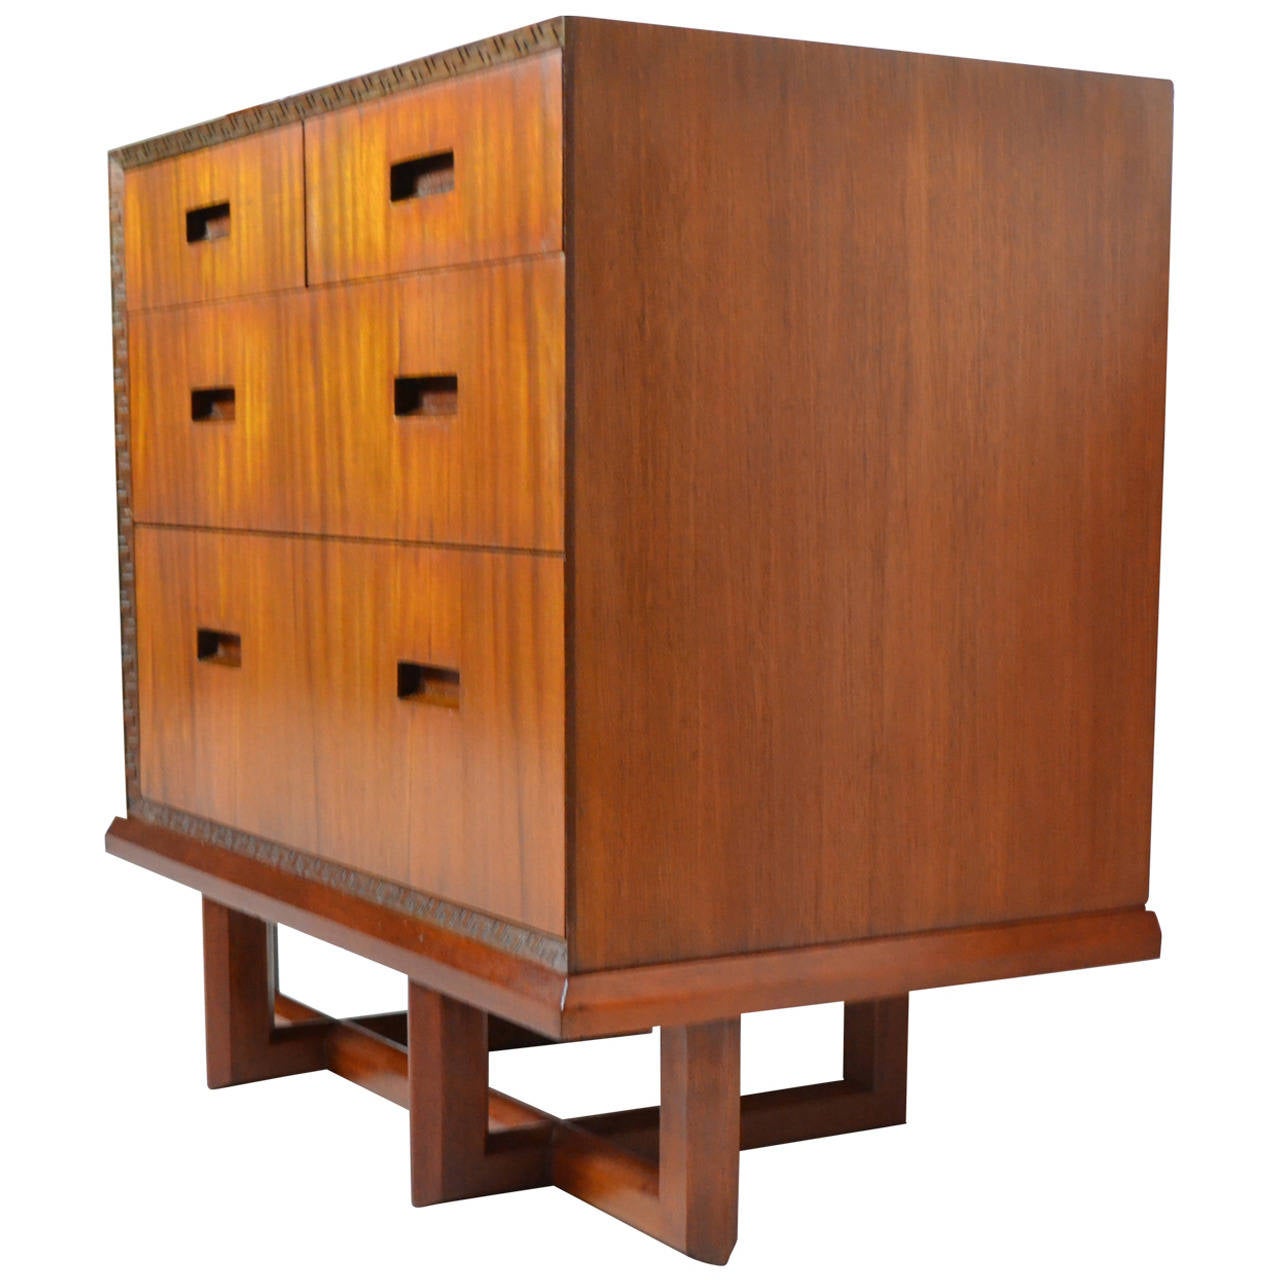 Frank Lloyd Wright mahogany four-drawer dresser on a cradle base from the 